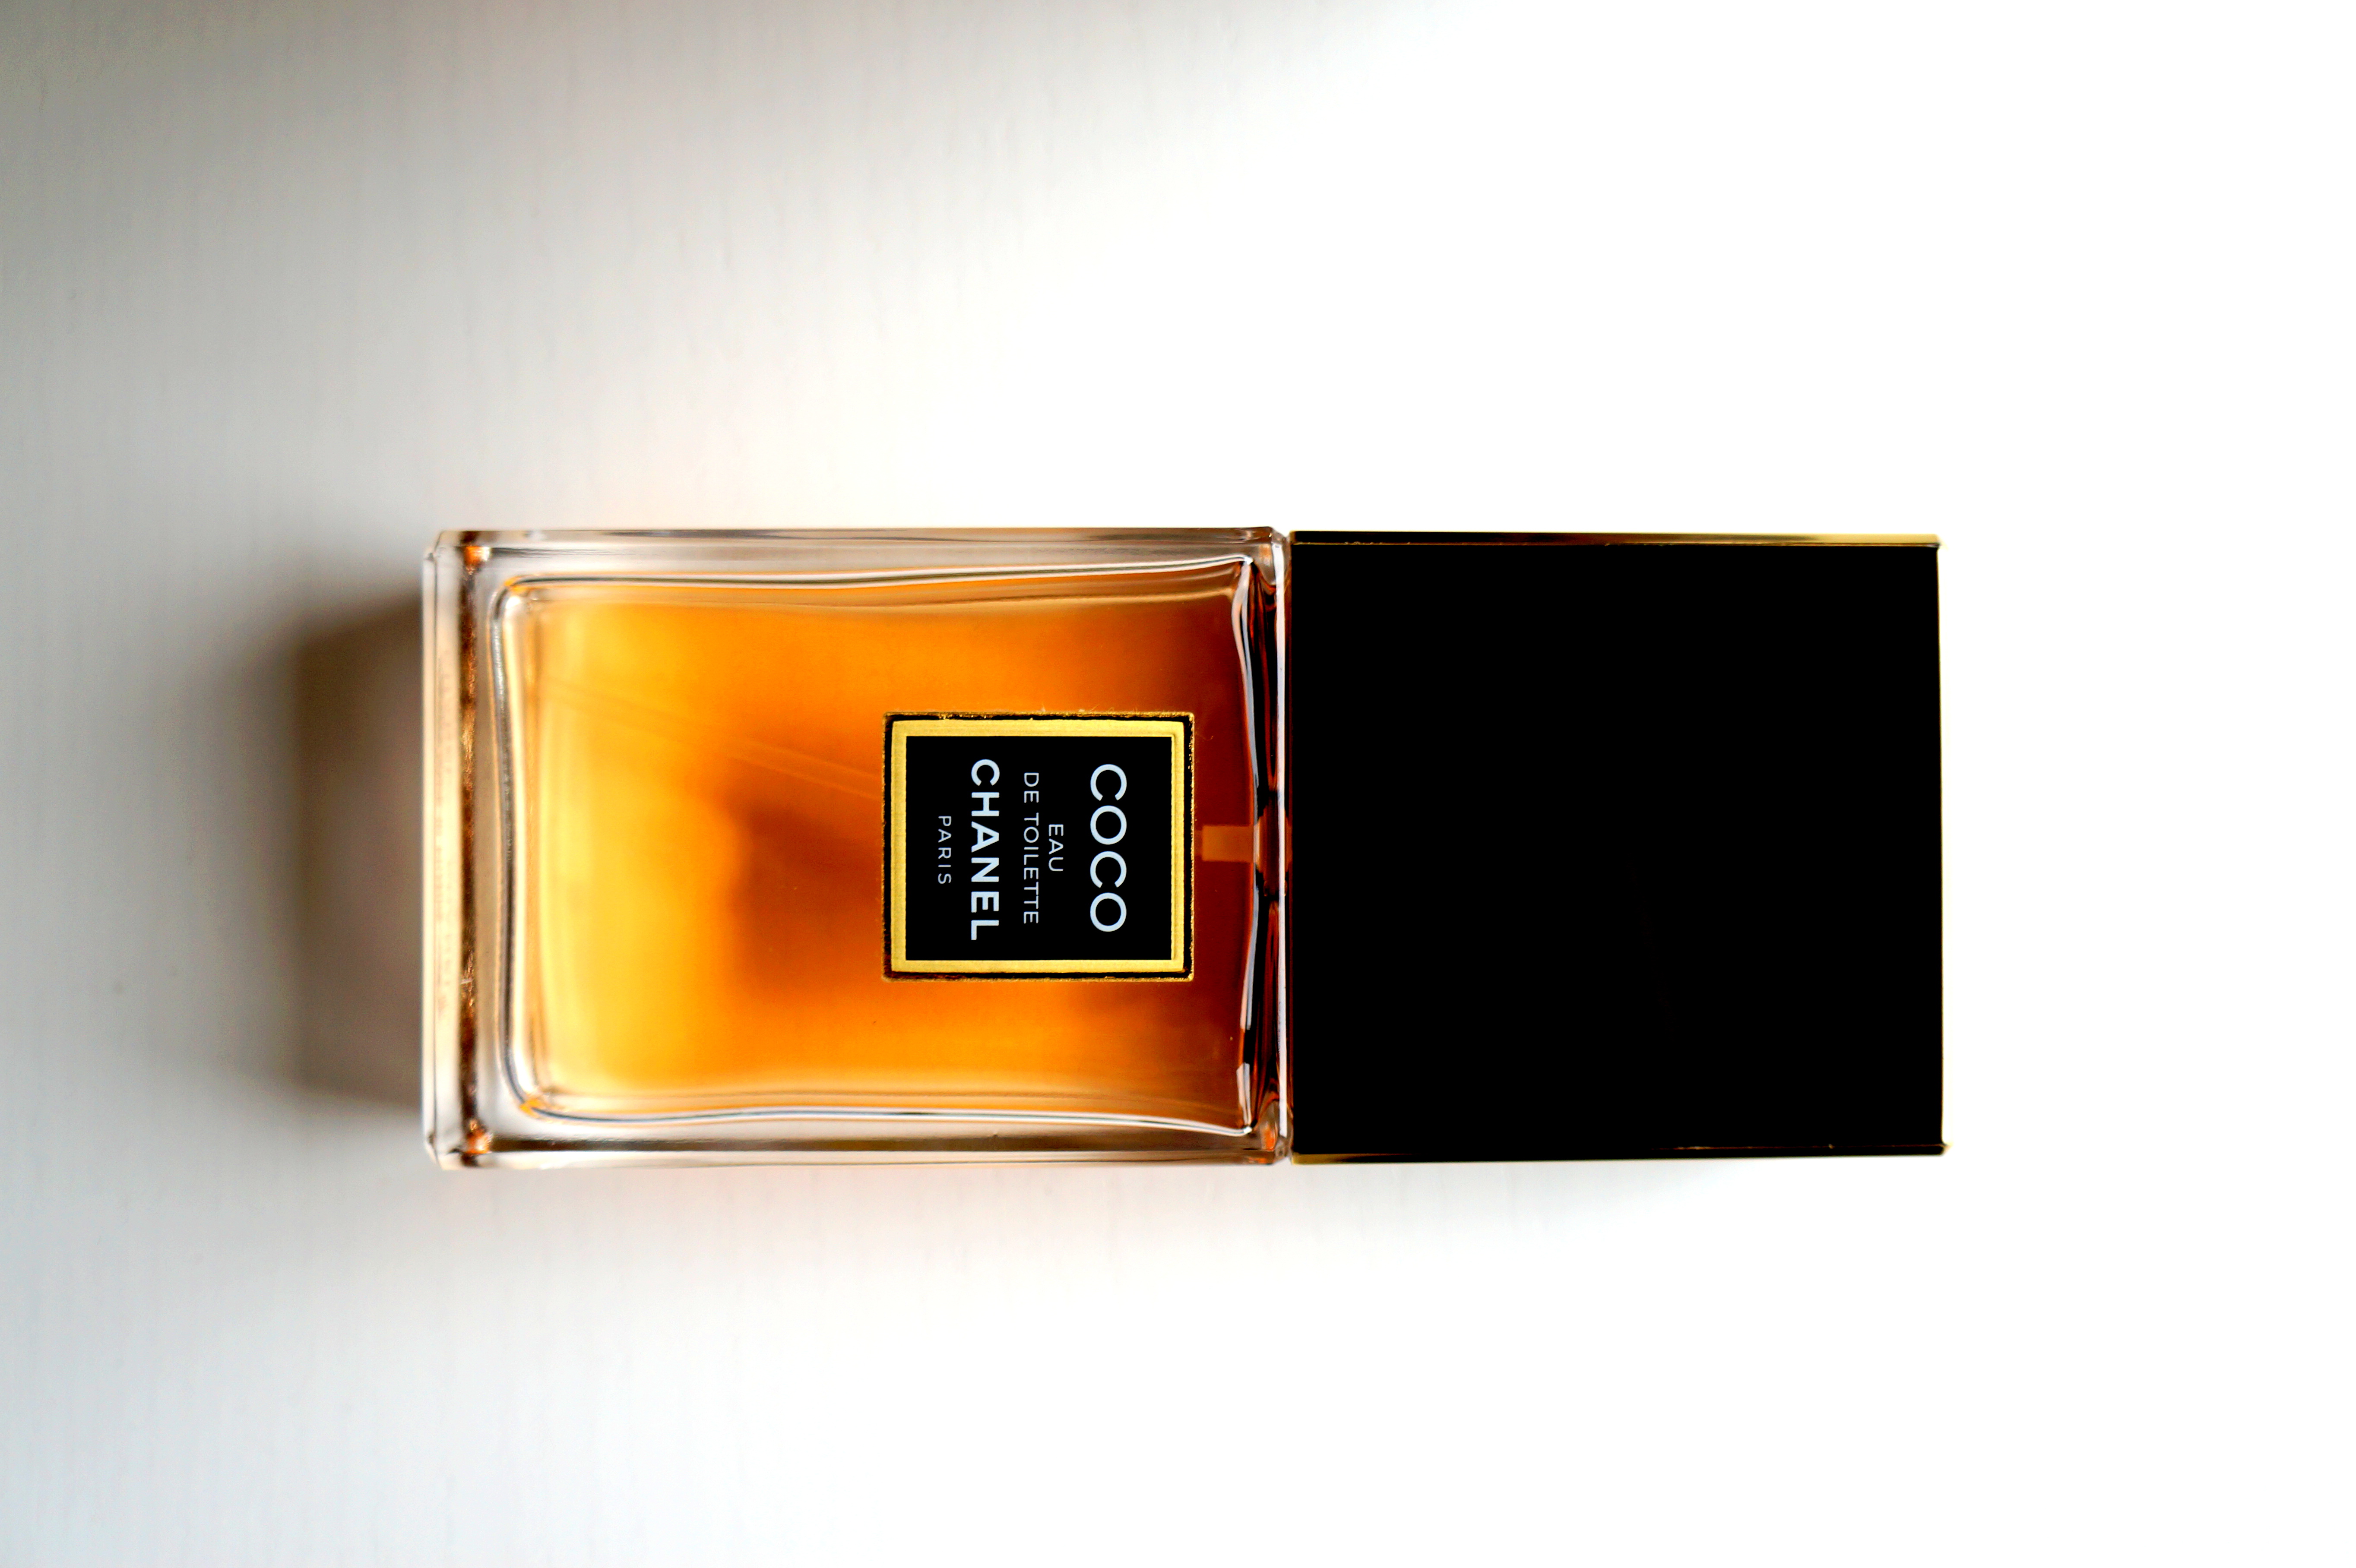 Coco-chanel edt 01